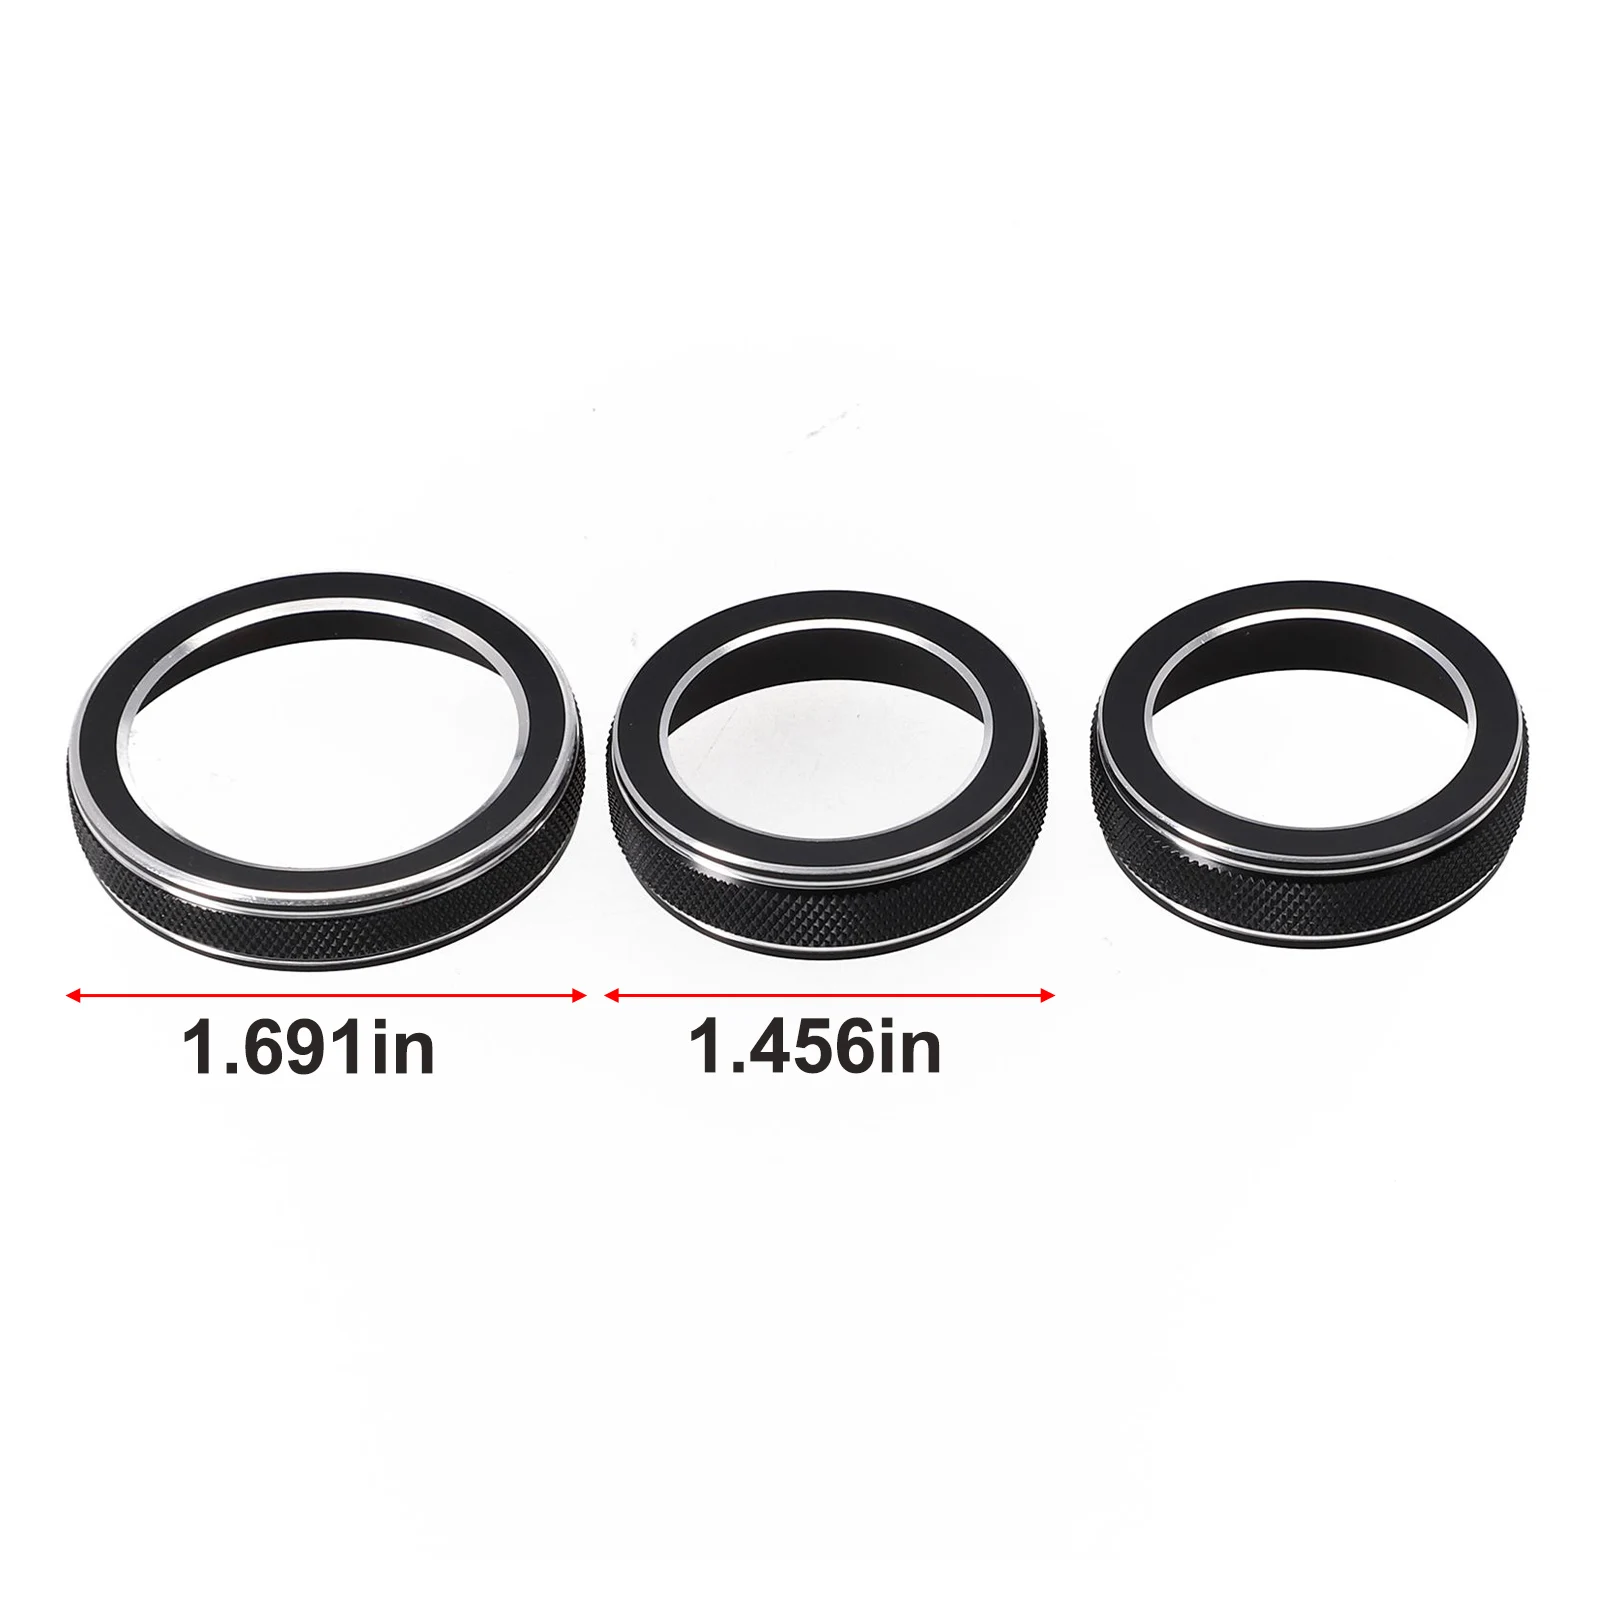 

Car AC Radio Switch Trim Ring Knob Black Cover Fits For -Jeep Grand For -Cherokee 2014-2021 Decorative Ring Knob Cover